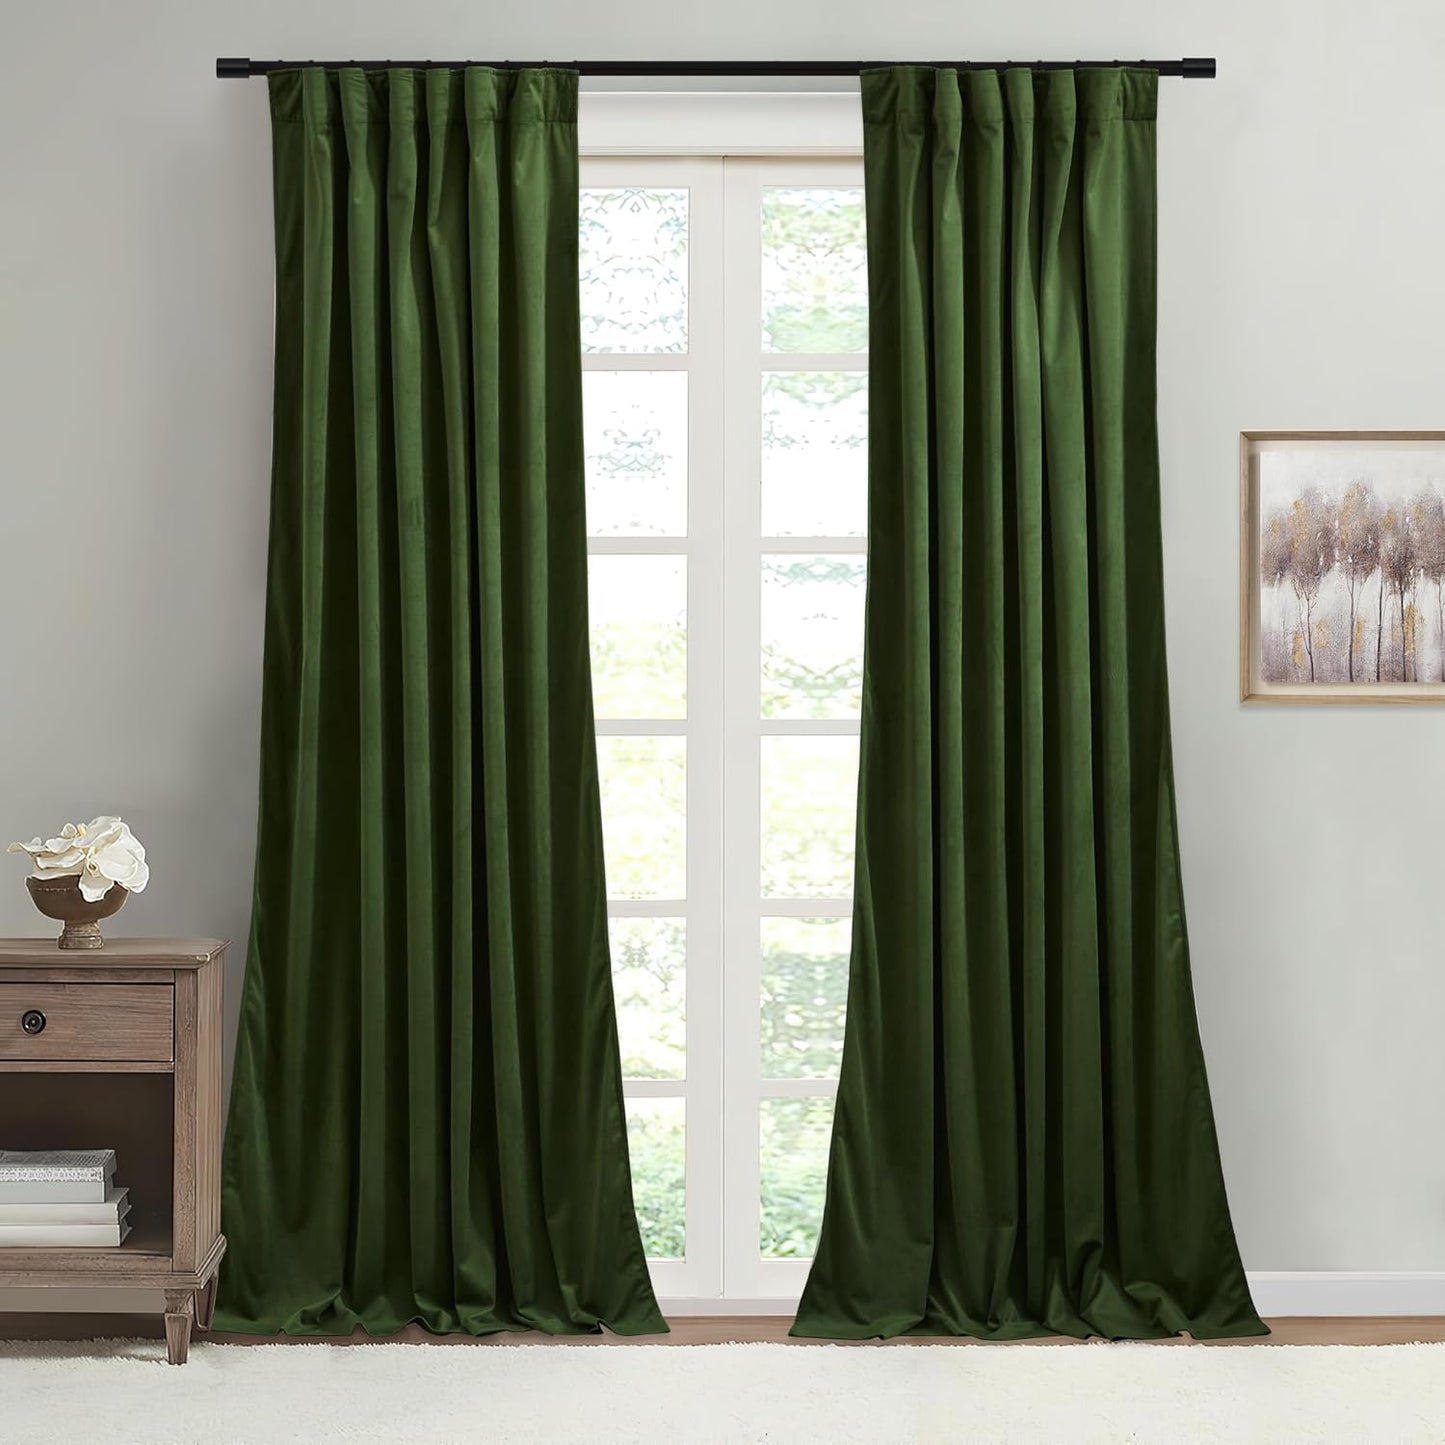 Velvet Curtains 84 Inches 2 Panels Green Blackout Curtains Thermal Insulated Privacy Drapes Back Tab, Moss Green, W52 X L84 Inches, 2 Panels